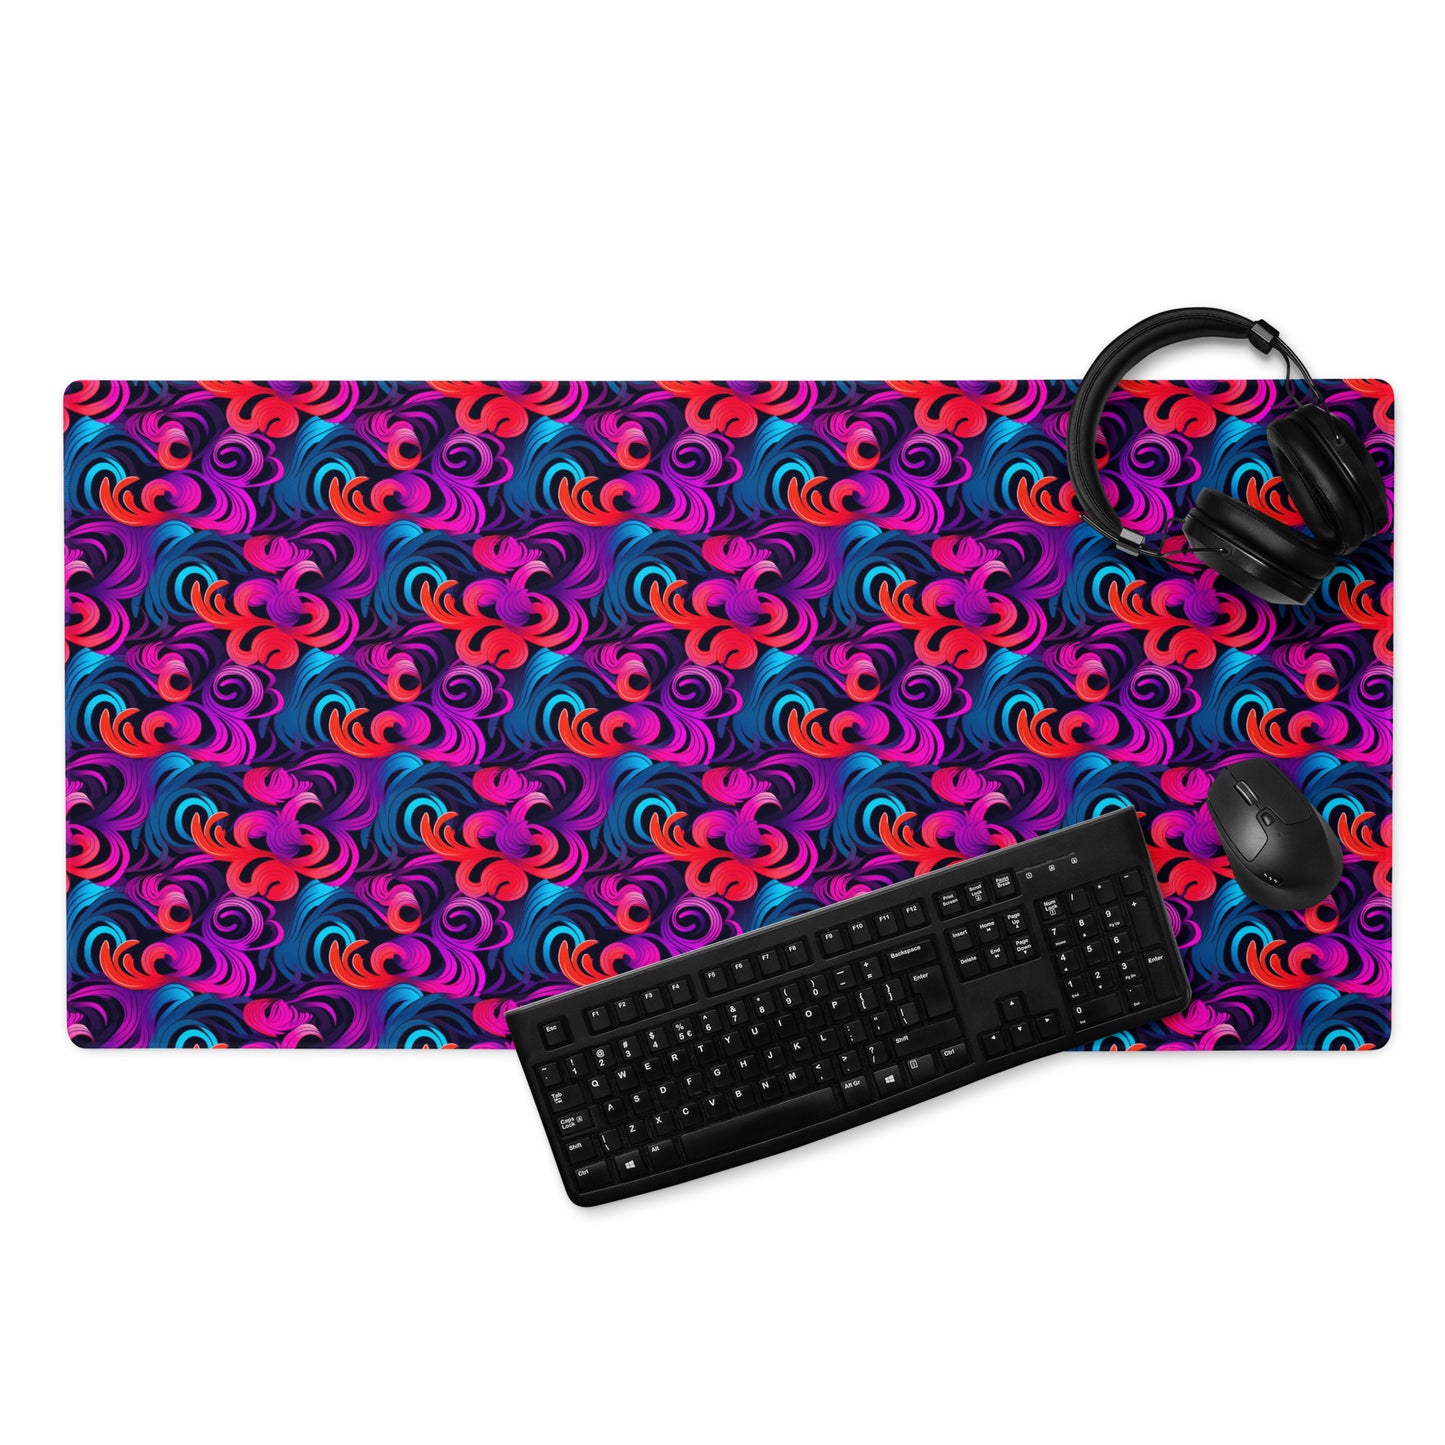 A 36" x 18" desk pad with a bright floral pattern all over it displayed with a keyboard, headphones and a mouse. Blue, Purple and Red in color.